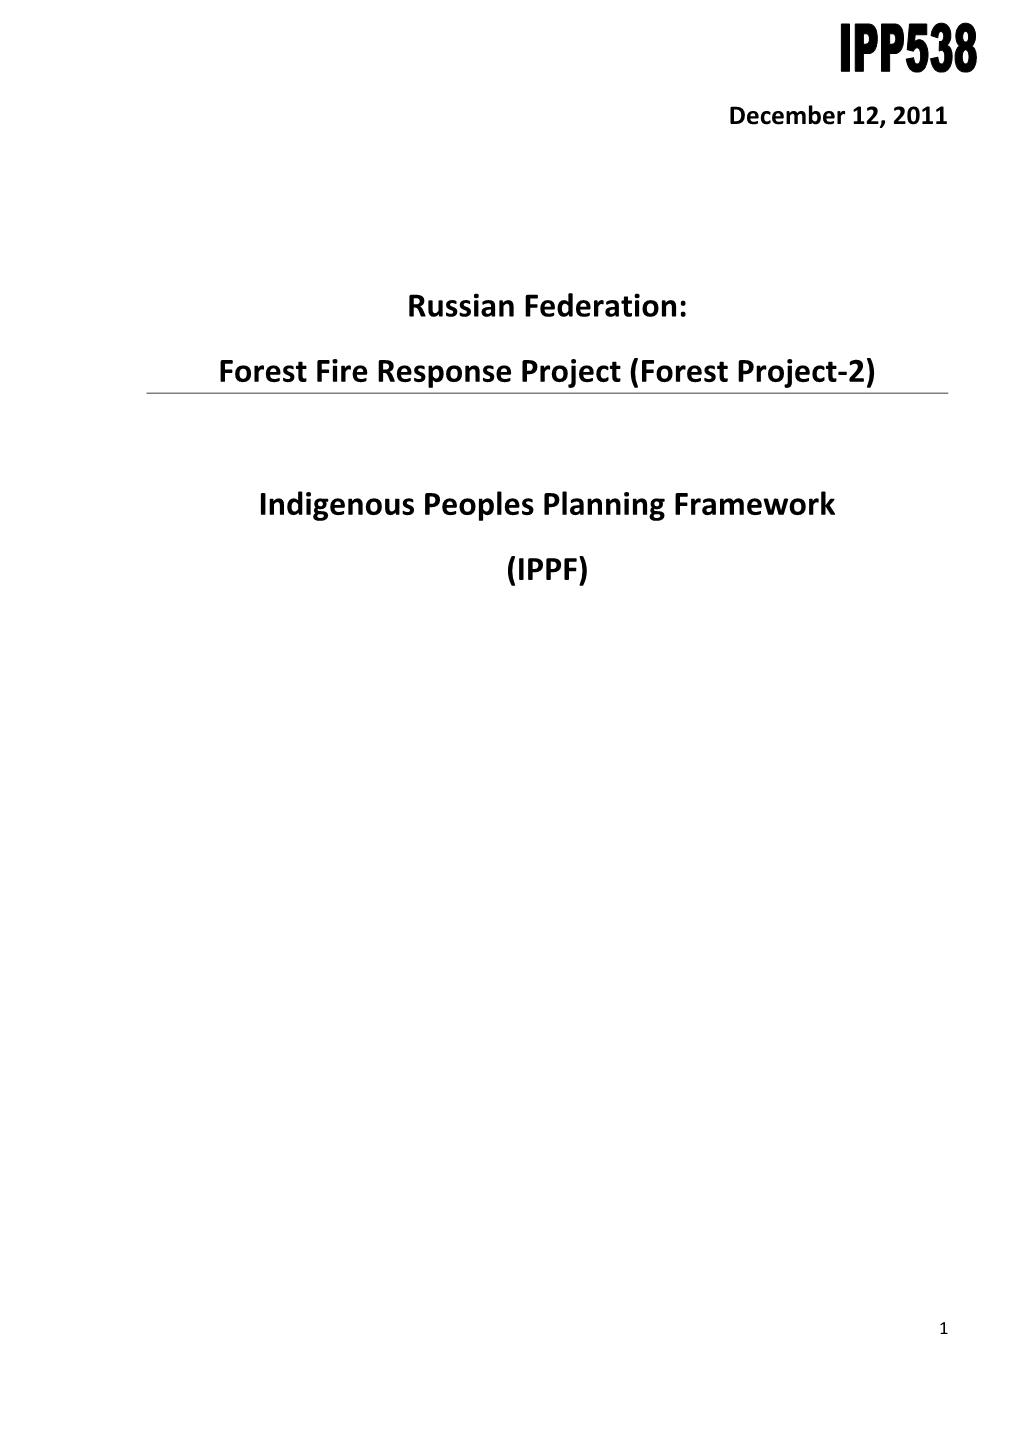 Forest Fire Response Project (Forest Project-2)